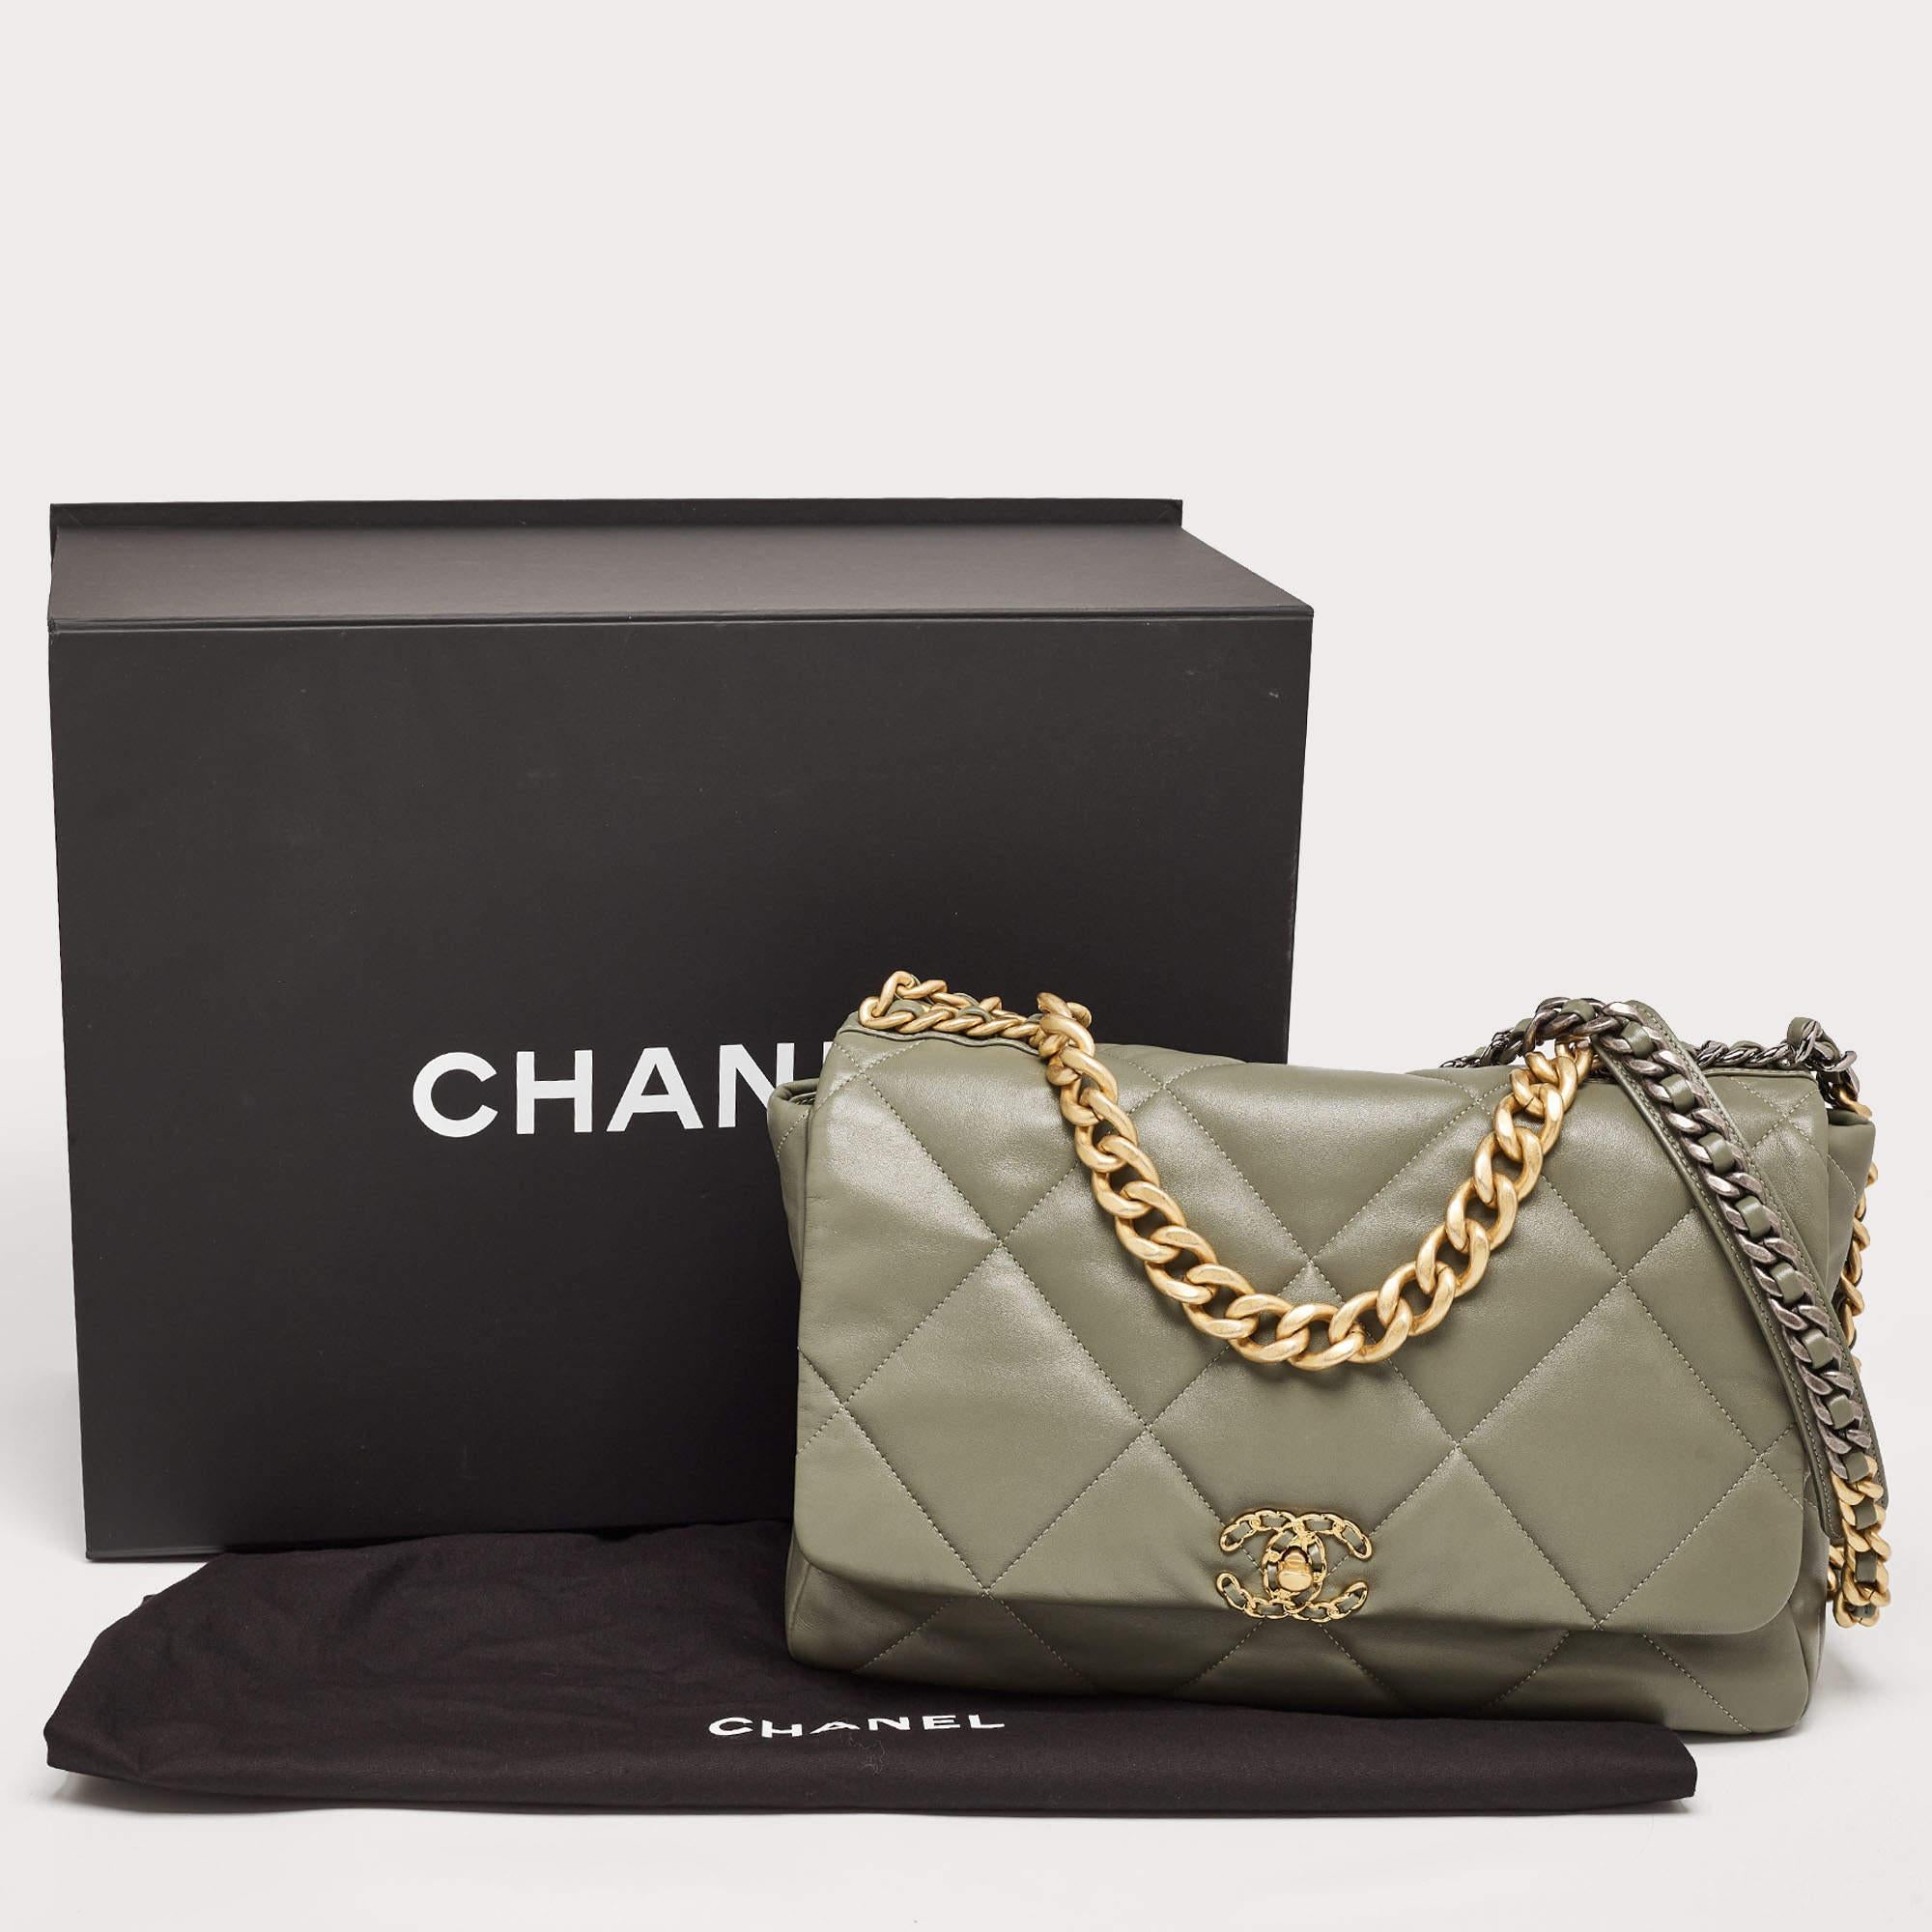 Chanel Fatigue Green Quilted Leather Maxi 19 Shoulder Bag 9